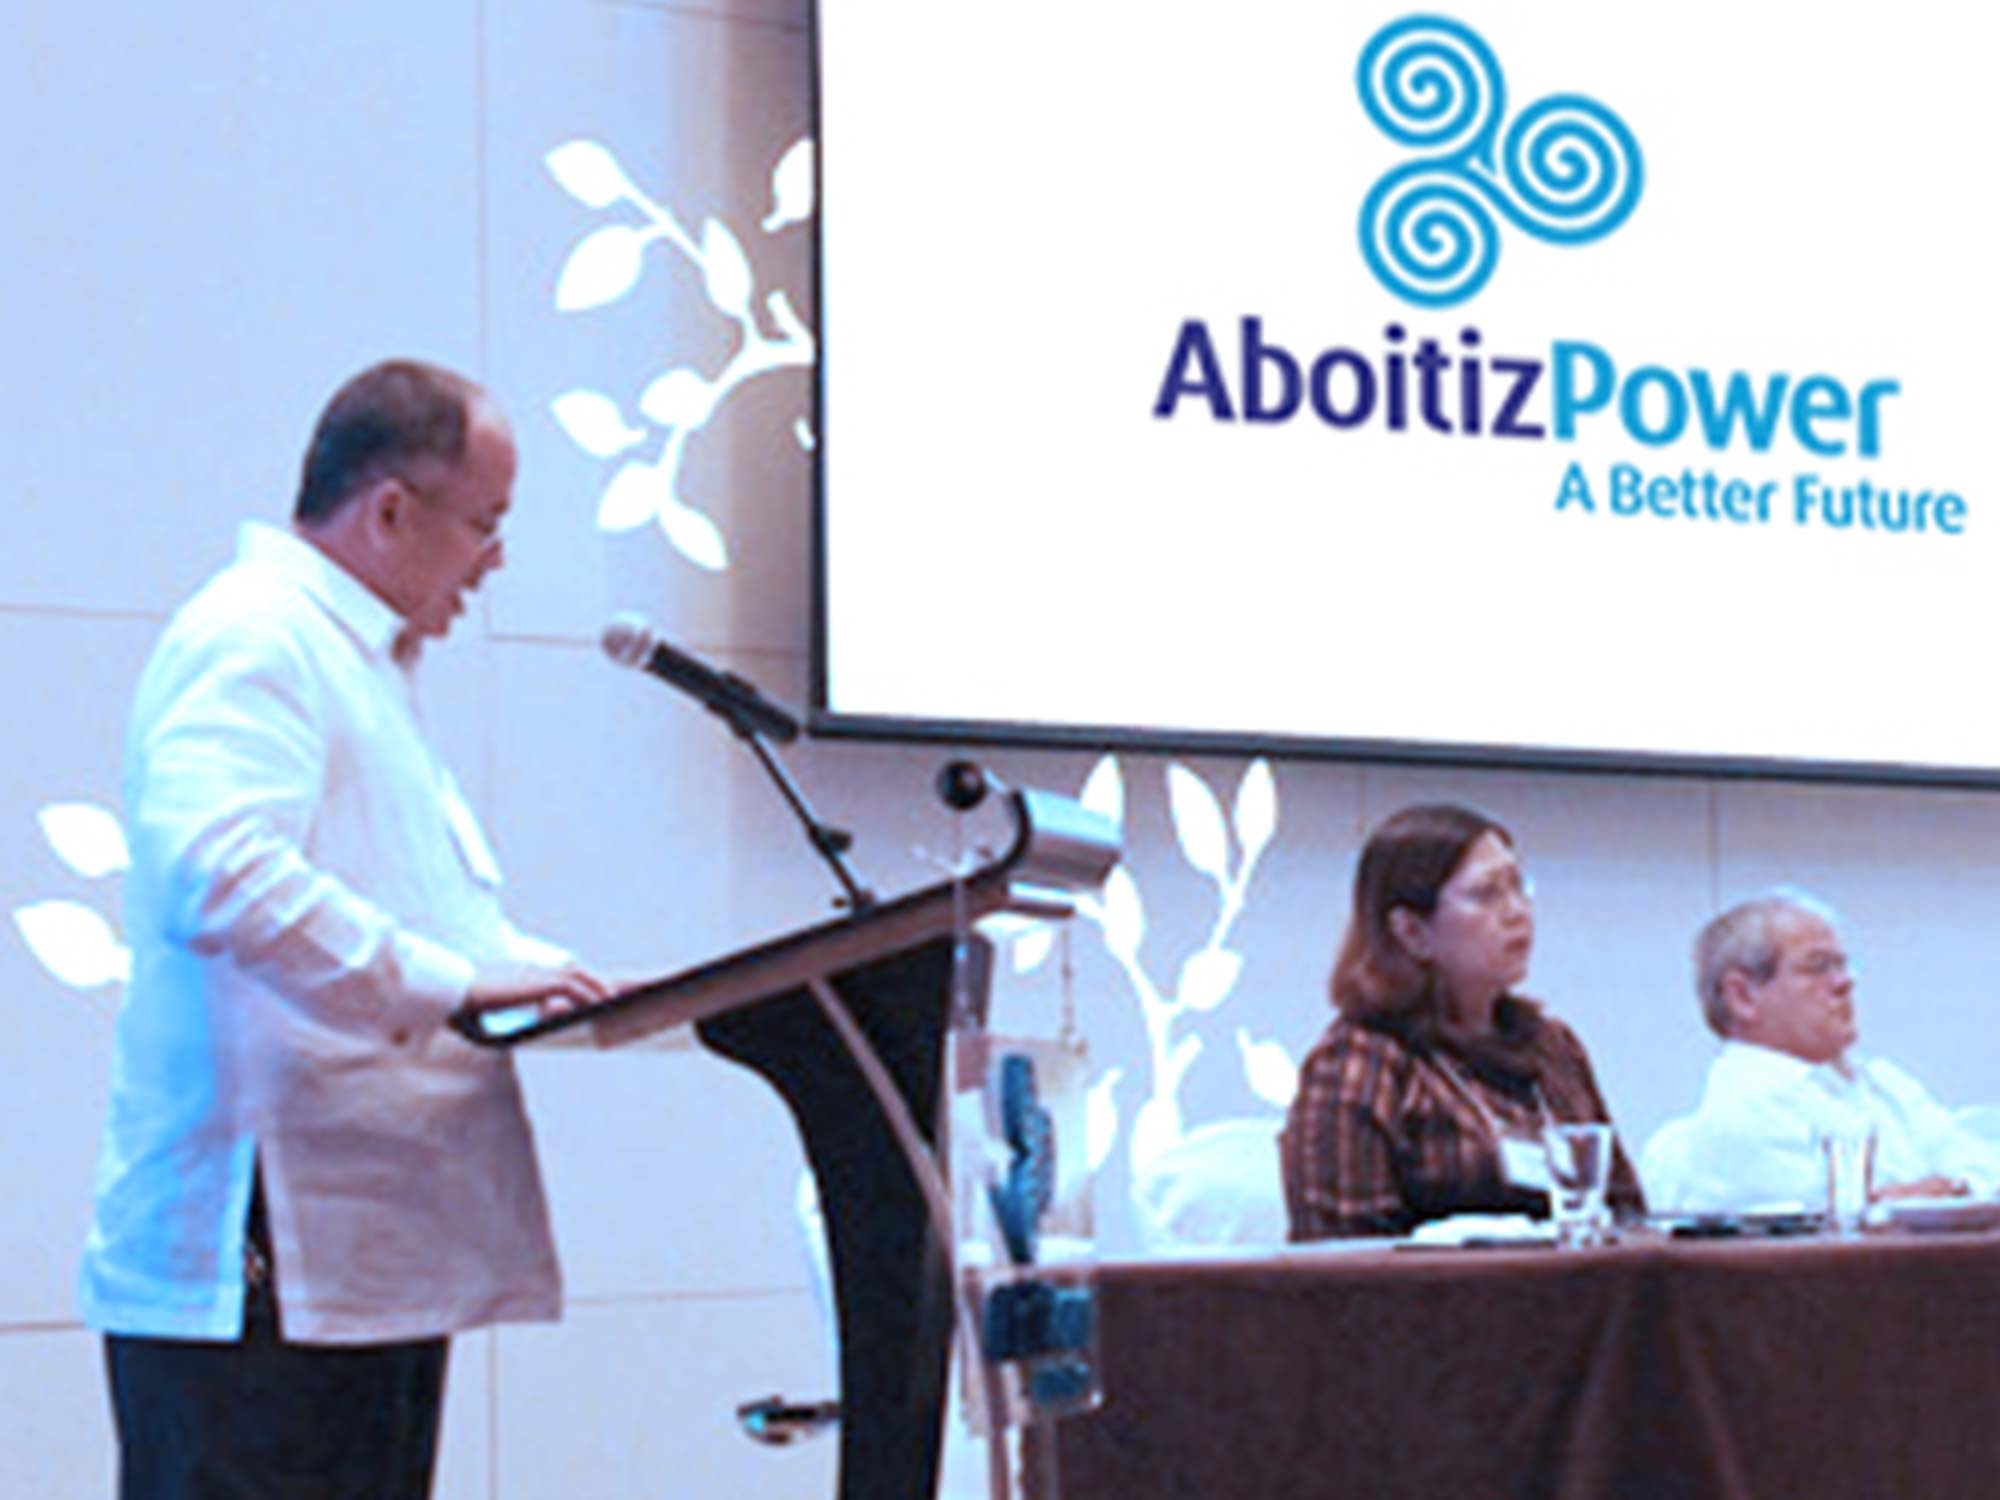 Brand Consultancy in Energy Industry. Launch for AboitizPower.